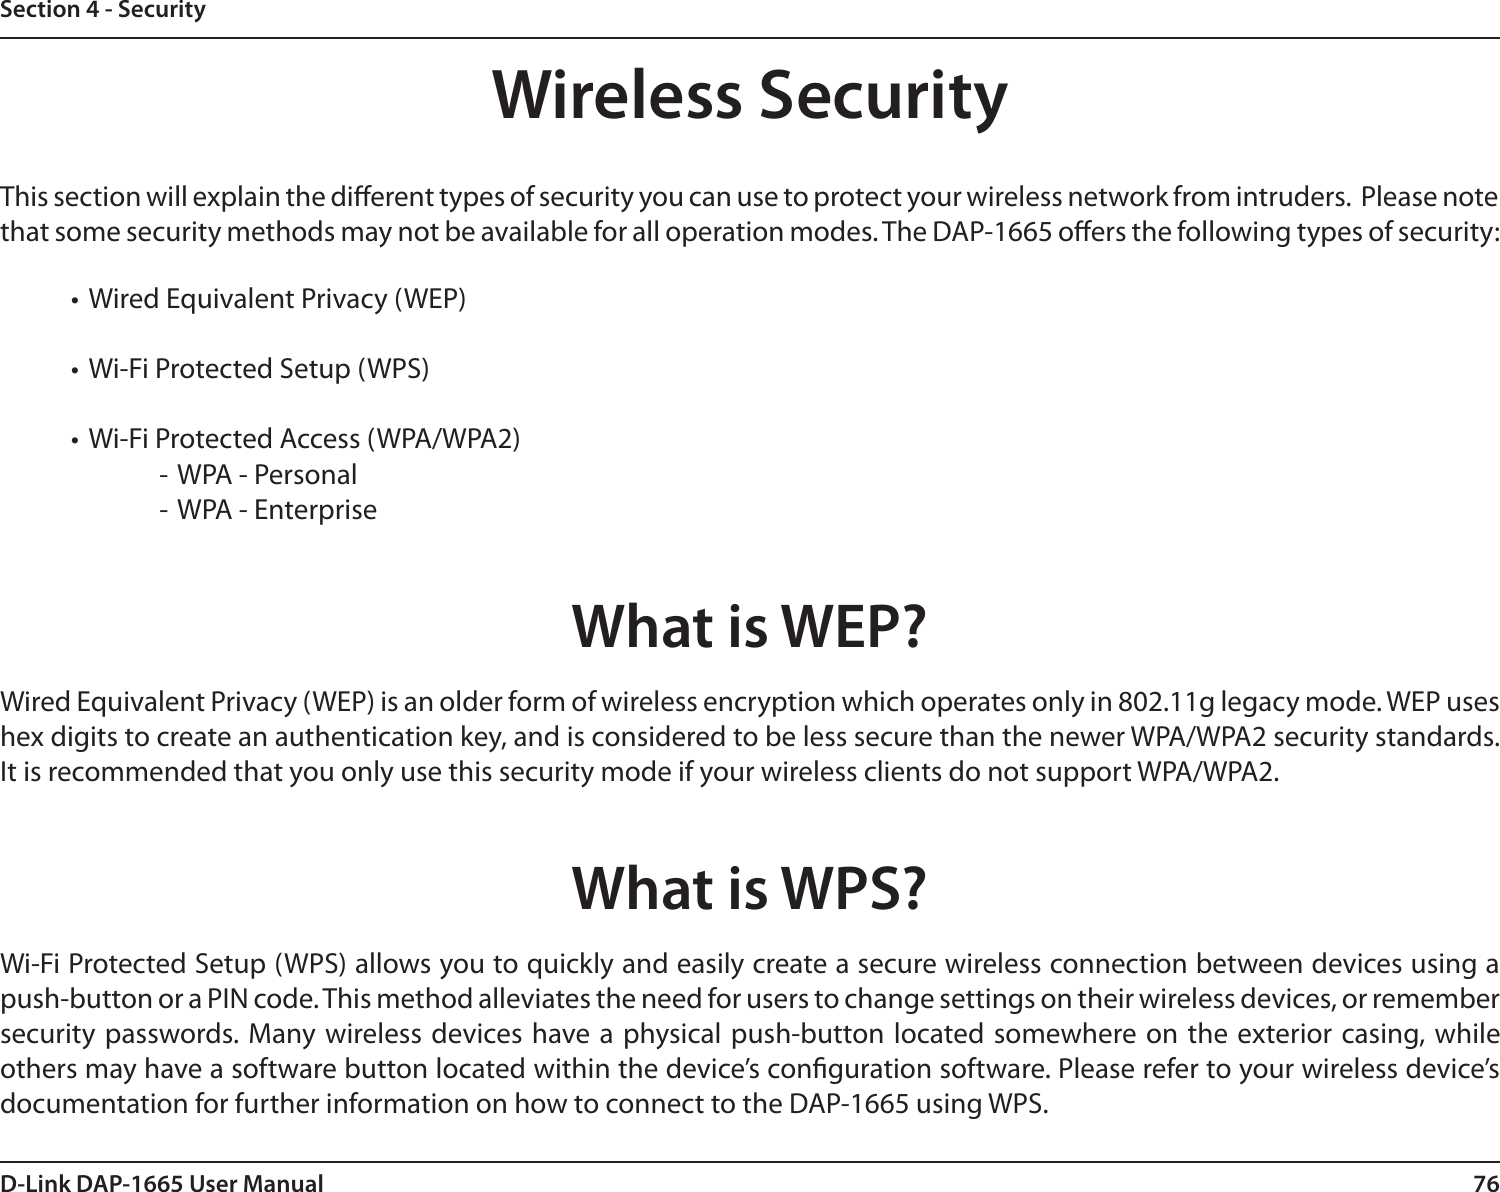 76D-Link DAP-1665 User ManualSection 4 - SecurityWireless SecurityThis section will explain the dierent types of security you can use to protect your wireless network from intruders.  Please note that some security methods may not be available for all operation modes. The DAP-1665 oers the following types of security:  • Wired Equivalent Privacy (WEP)• Wi-Fi Protected Setup (WPS)• Wi-Fi Protected Access (WPA/WPA2) - WPA - Personal - WPA - EnterpriseWhat is WEP?Wired Equivalent Privacy (WEP) is an older form of wireless encryption which operates only in 802.11g legacy mode. WEP uses hex digits to create an authentication key, and is considered to be less secure than the newer WPA/WPA2 security standards. It is recommended that you only use this security mode if your wireless clients do not support WPA/WPA2. What is WPS?Wi-Fi Protected Setup (WPS) allows you to quickly and easily create a secure wireless connection between devices using a push-button or a PIN code. This method alleviates the need for users to change settings on their wireless devices, or remember security  passwords. Many wireless devices have a physical push-button located somewhere on the  exterior casing, while others may have a software button located within the device’s conguration software. Please refer to your wireless device’s documentation for further information on how to connect to the DAP-1665 using WPS. 